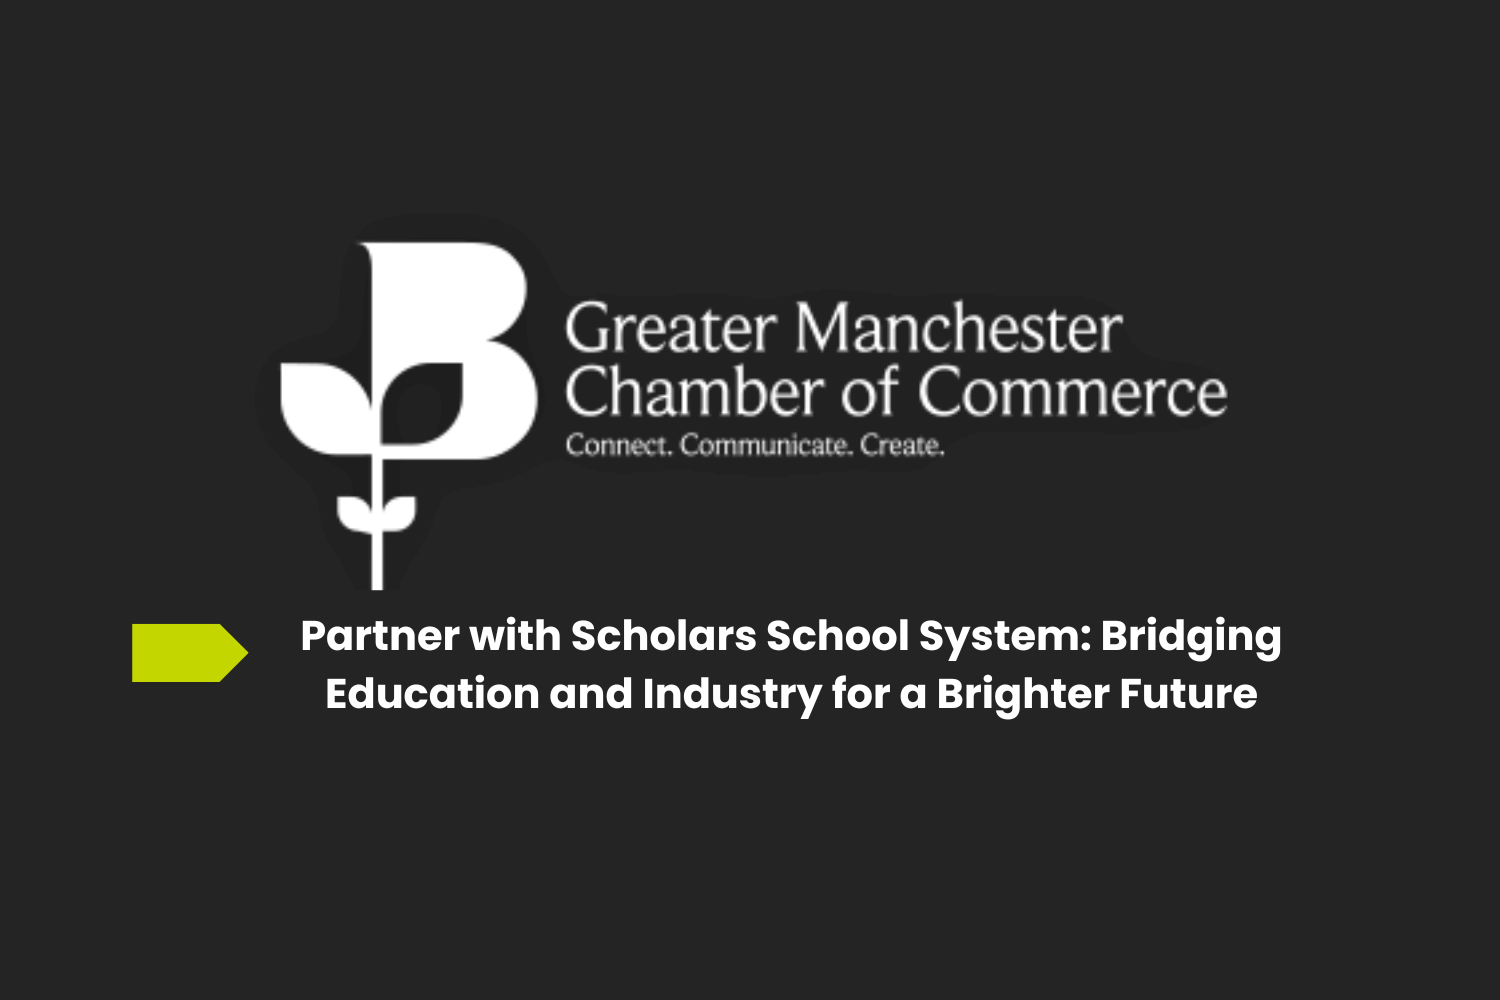 Partner with Scholars School System: Bridging Education and Industry for a Brighter Future